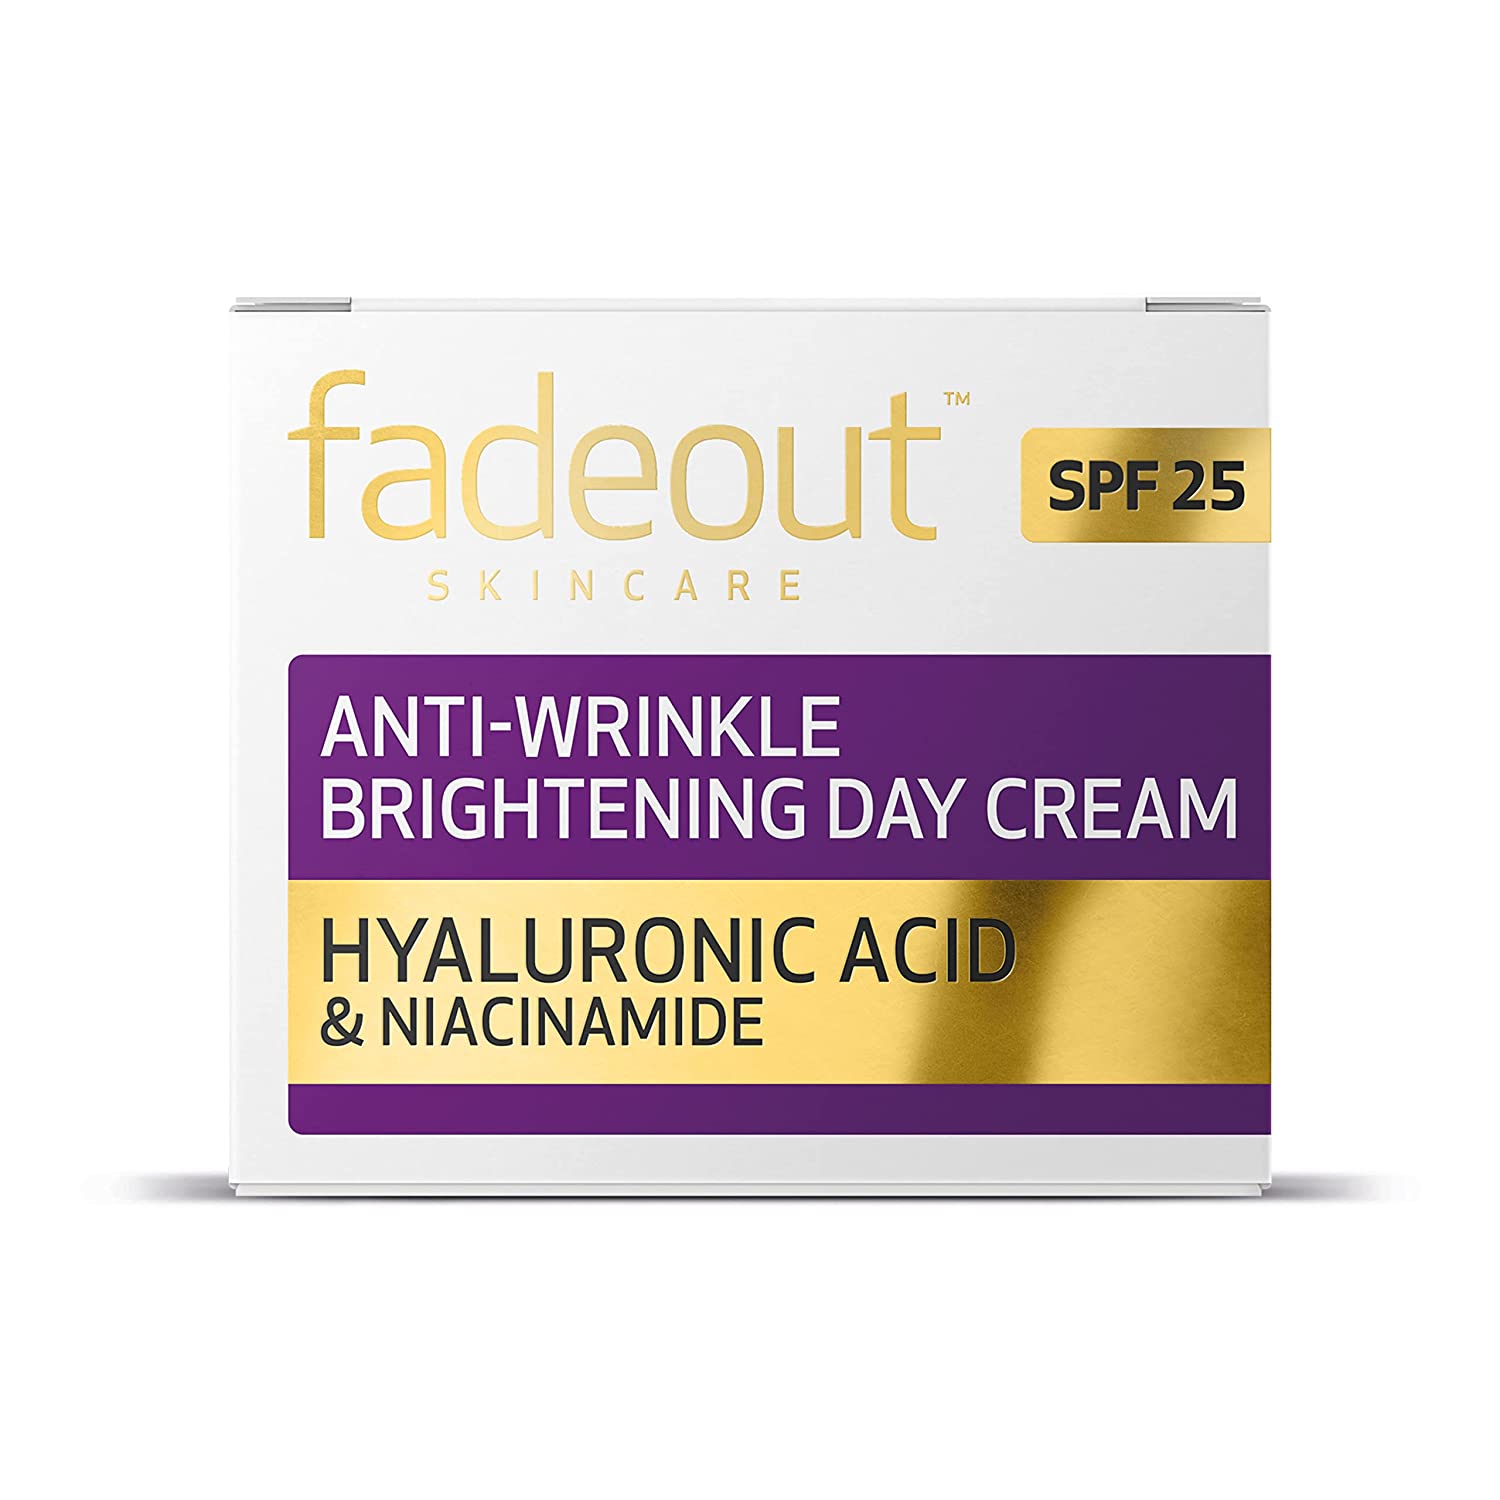 Fadeout Anti-Wrinkle Brightening Day Cream Spf 25 (50ml) Fadeout